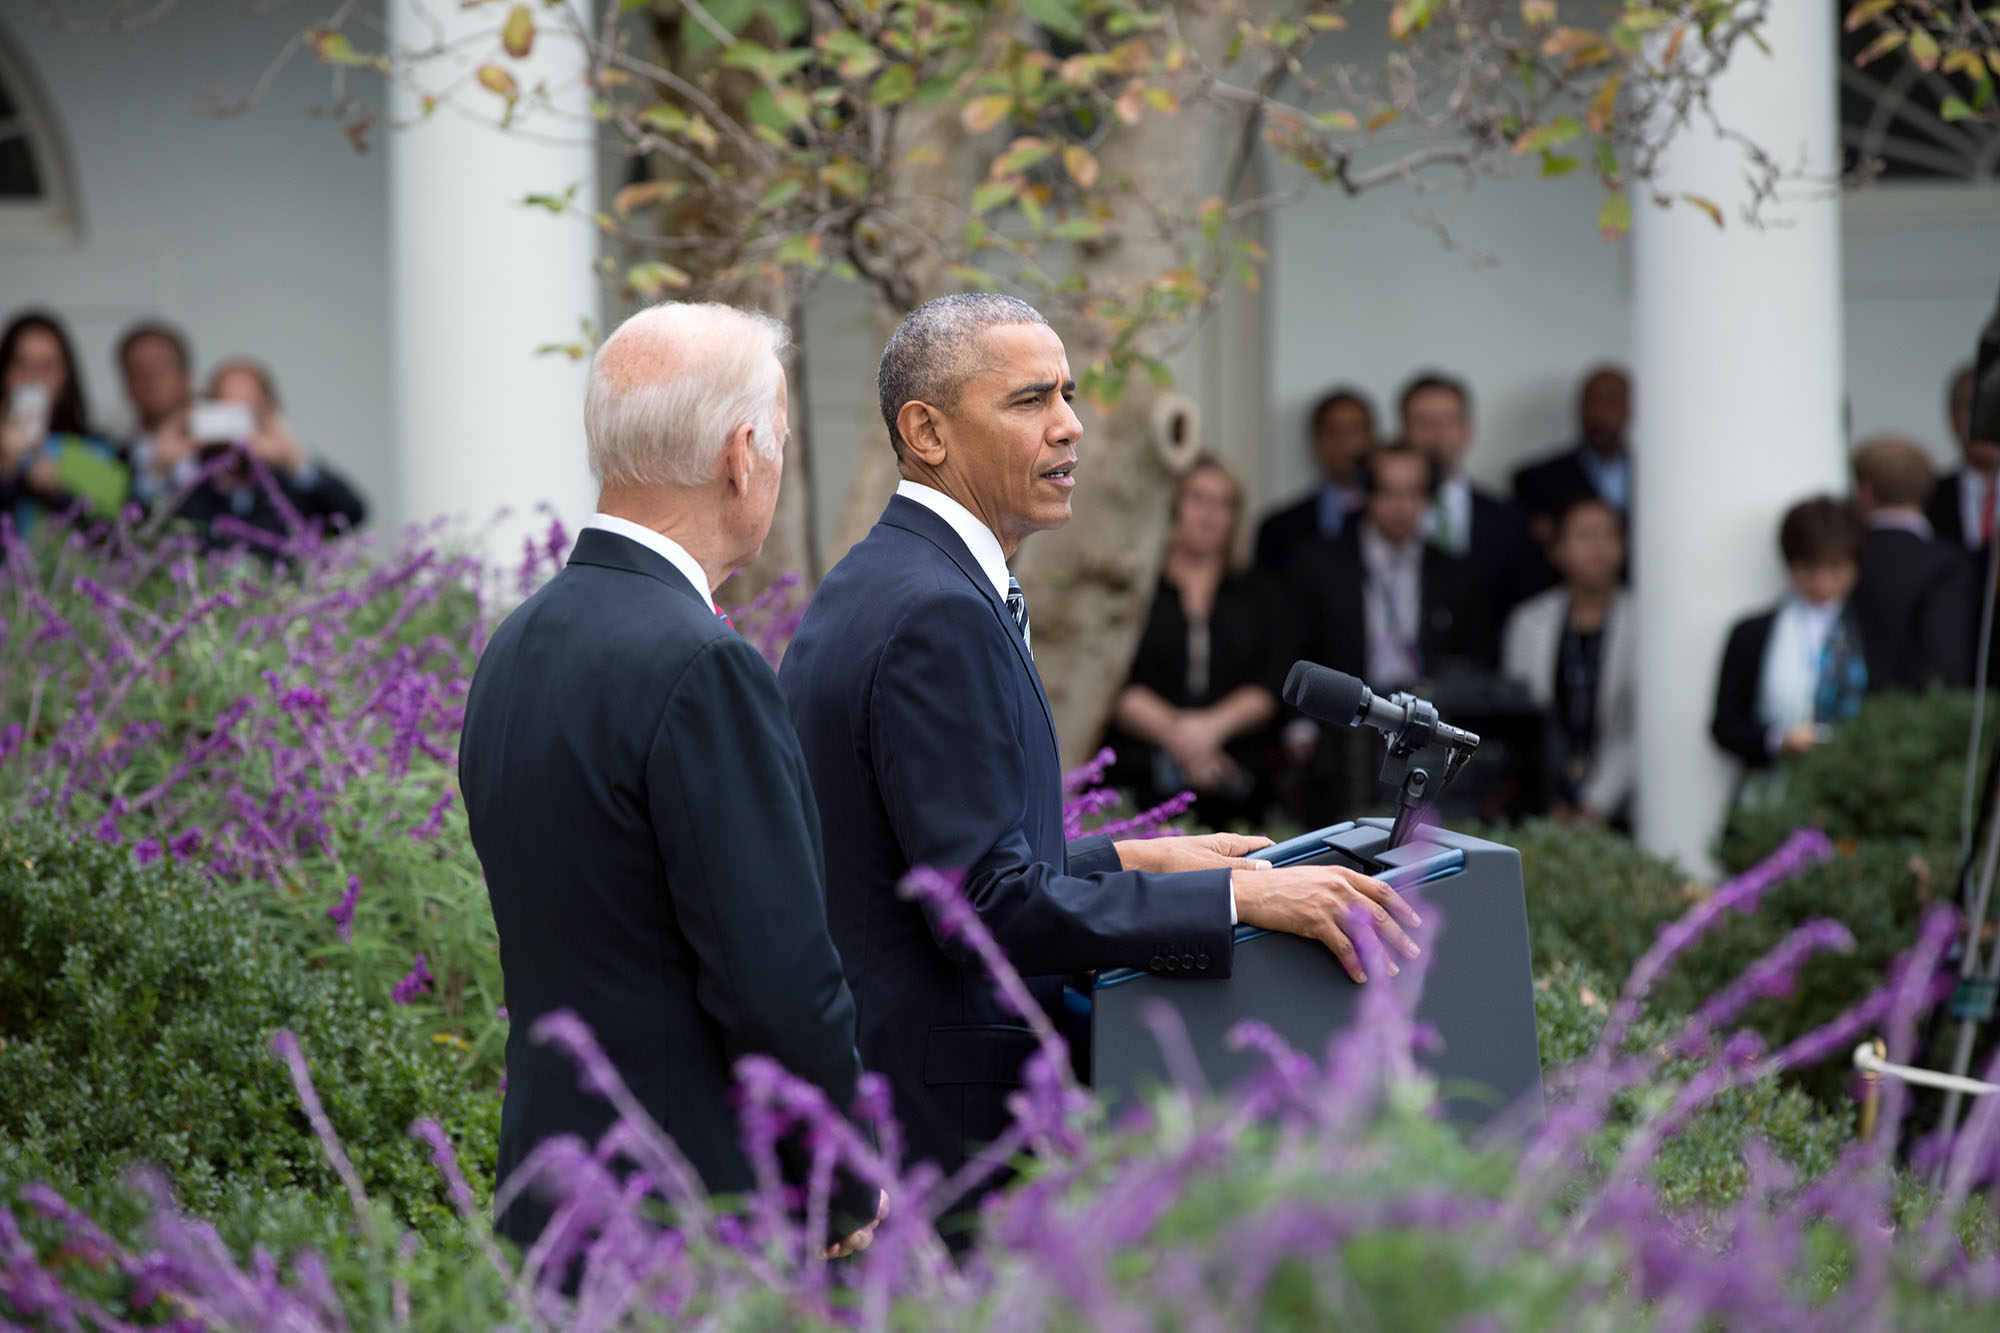 President Barack Obama, with Vice President Joe Biden, delivers a statement regarding the U.S. election results, in the Rose Garden of the White House, Nov. 9, 2016. (Official White House Photo by Pete Souza)